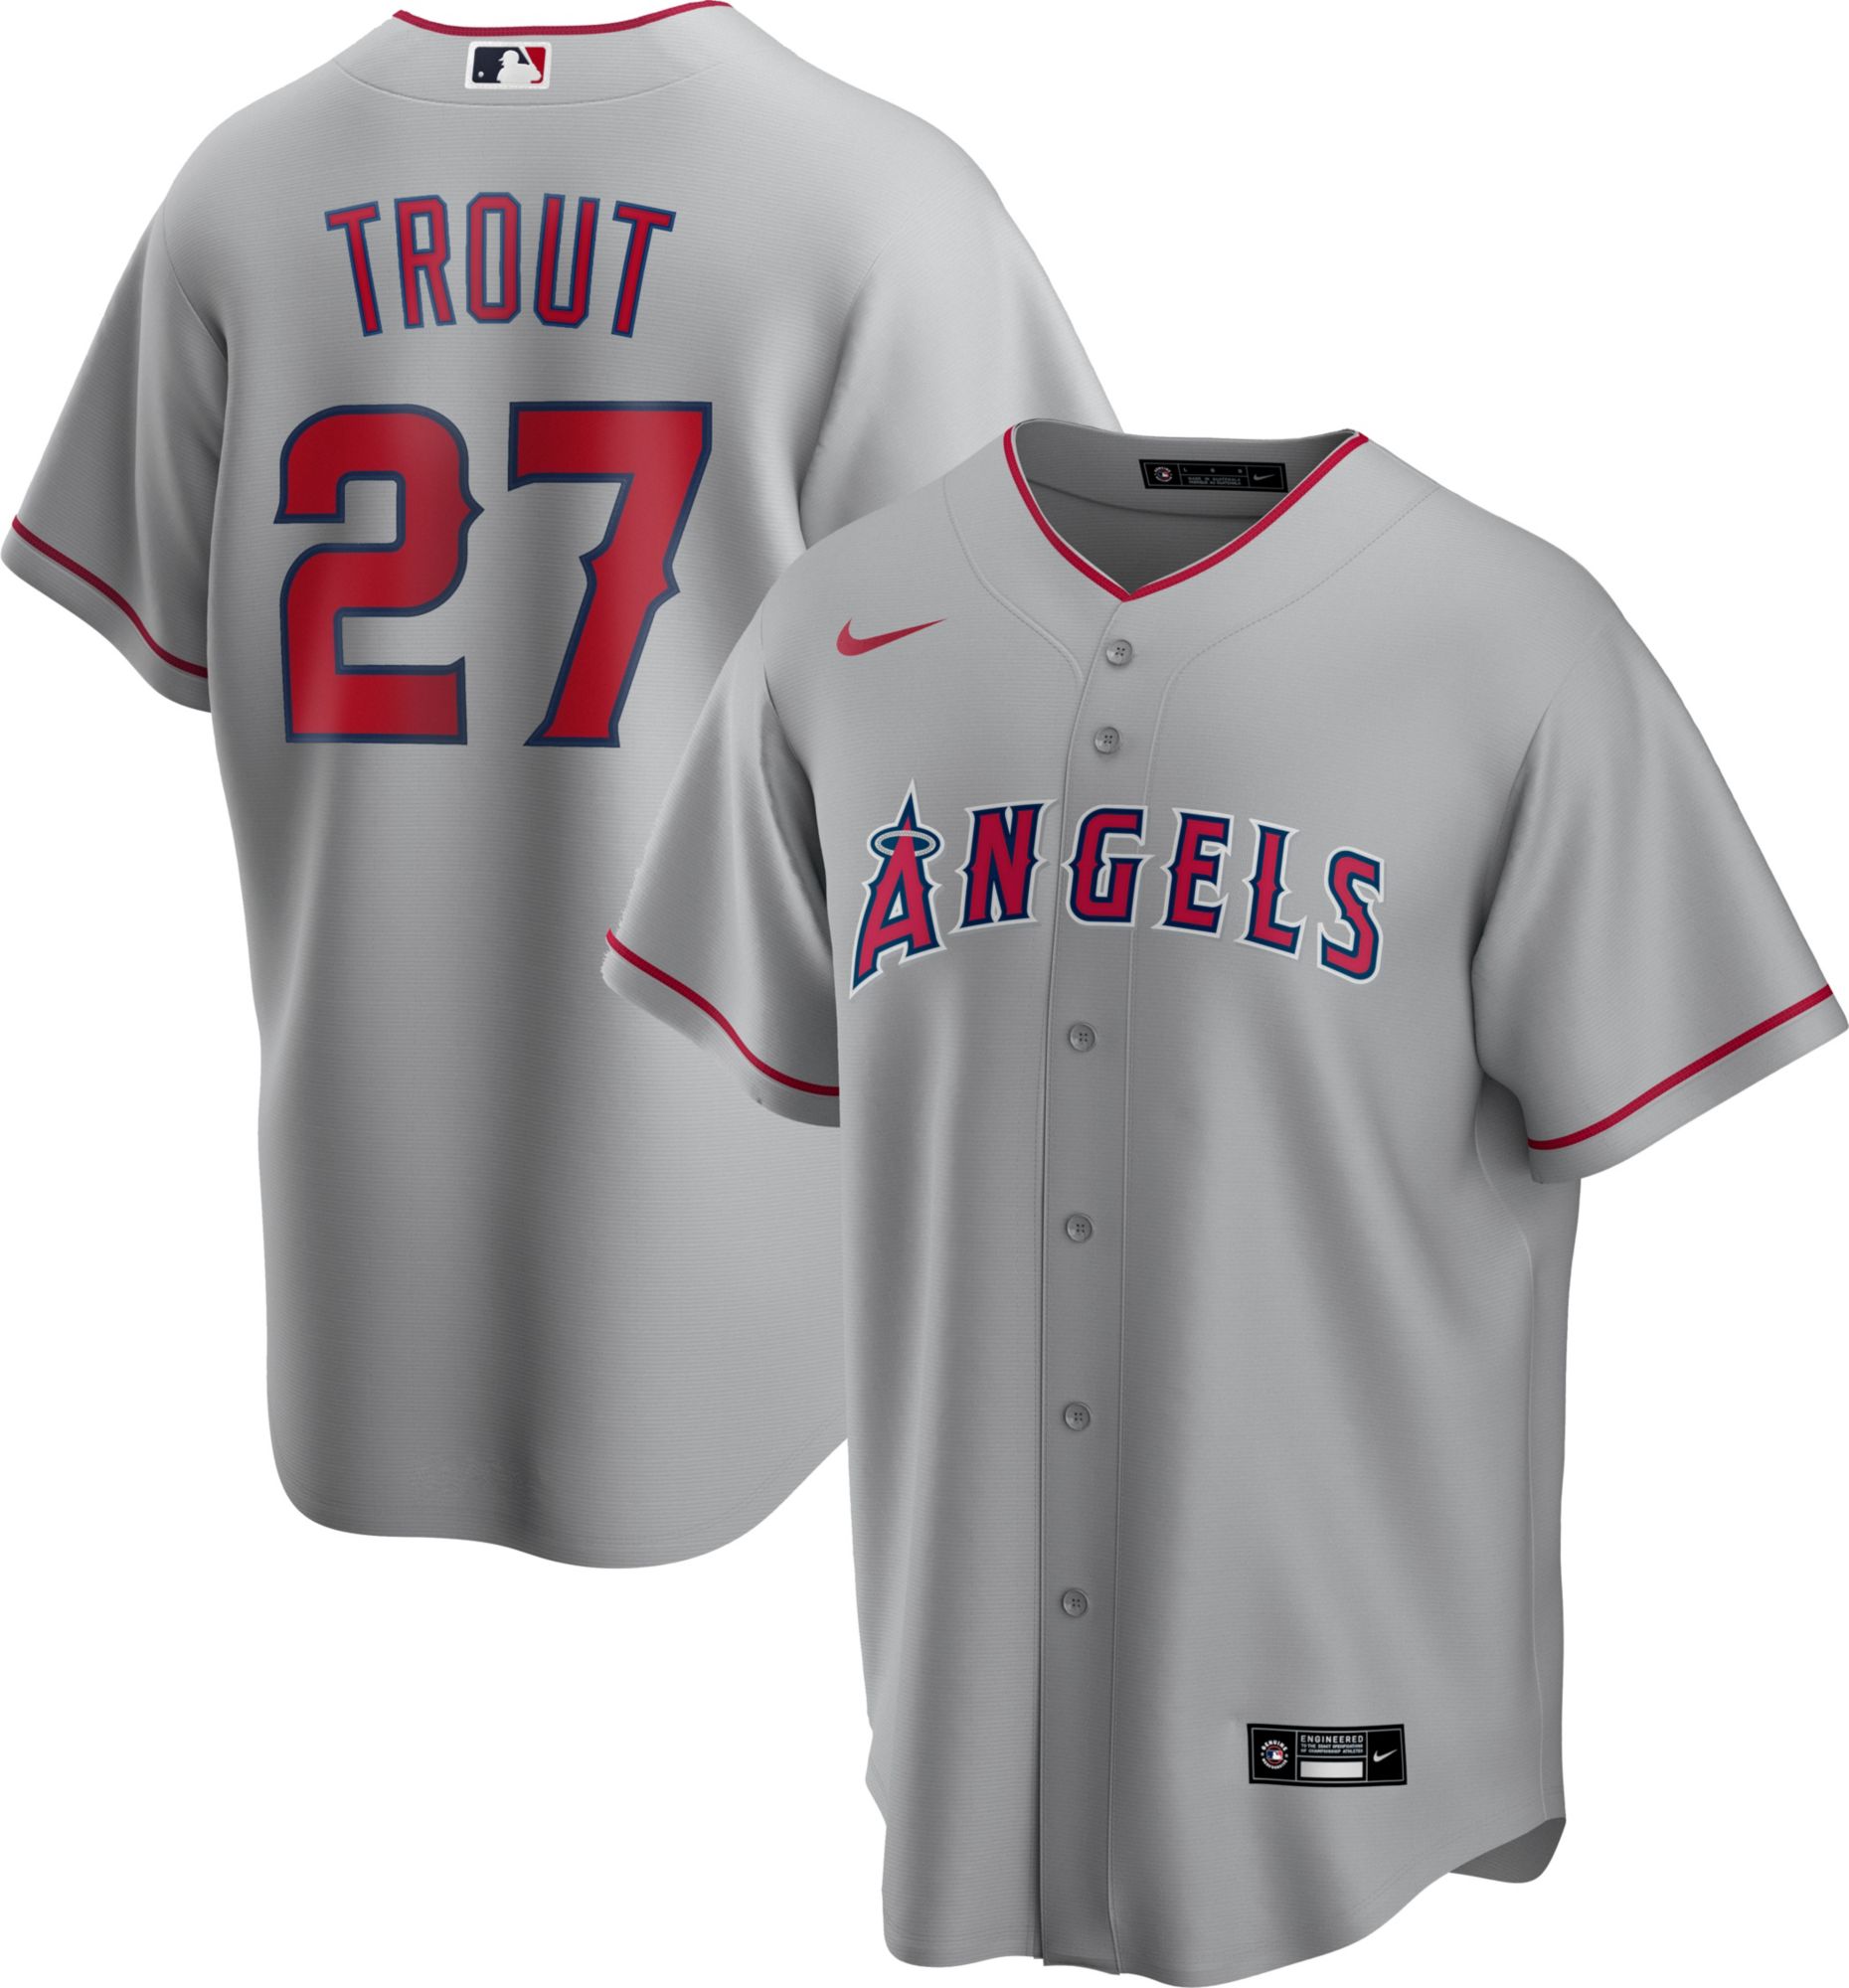 2022 Mike Trout Game Used White Jersey - 44th Career Home Run